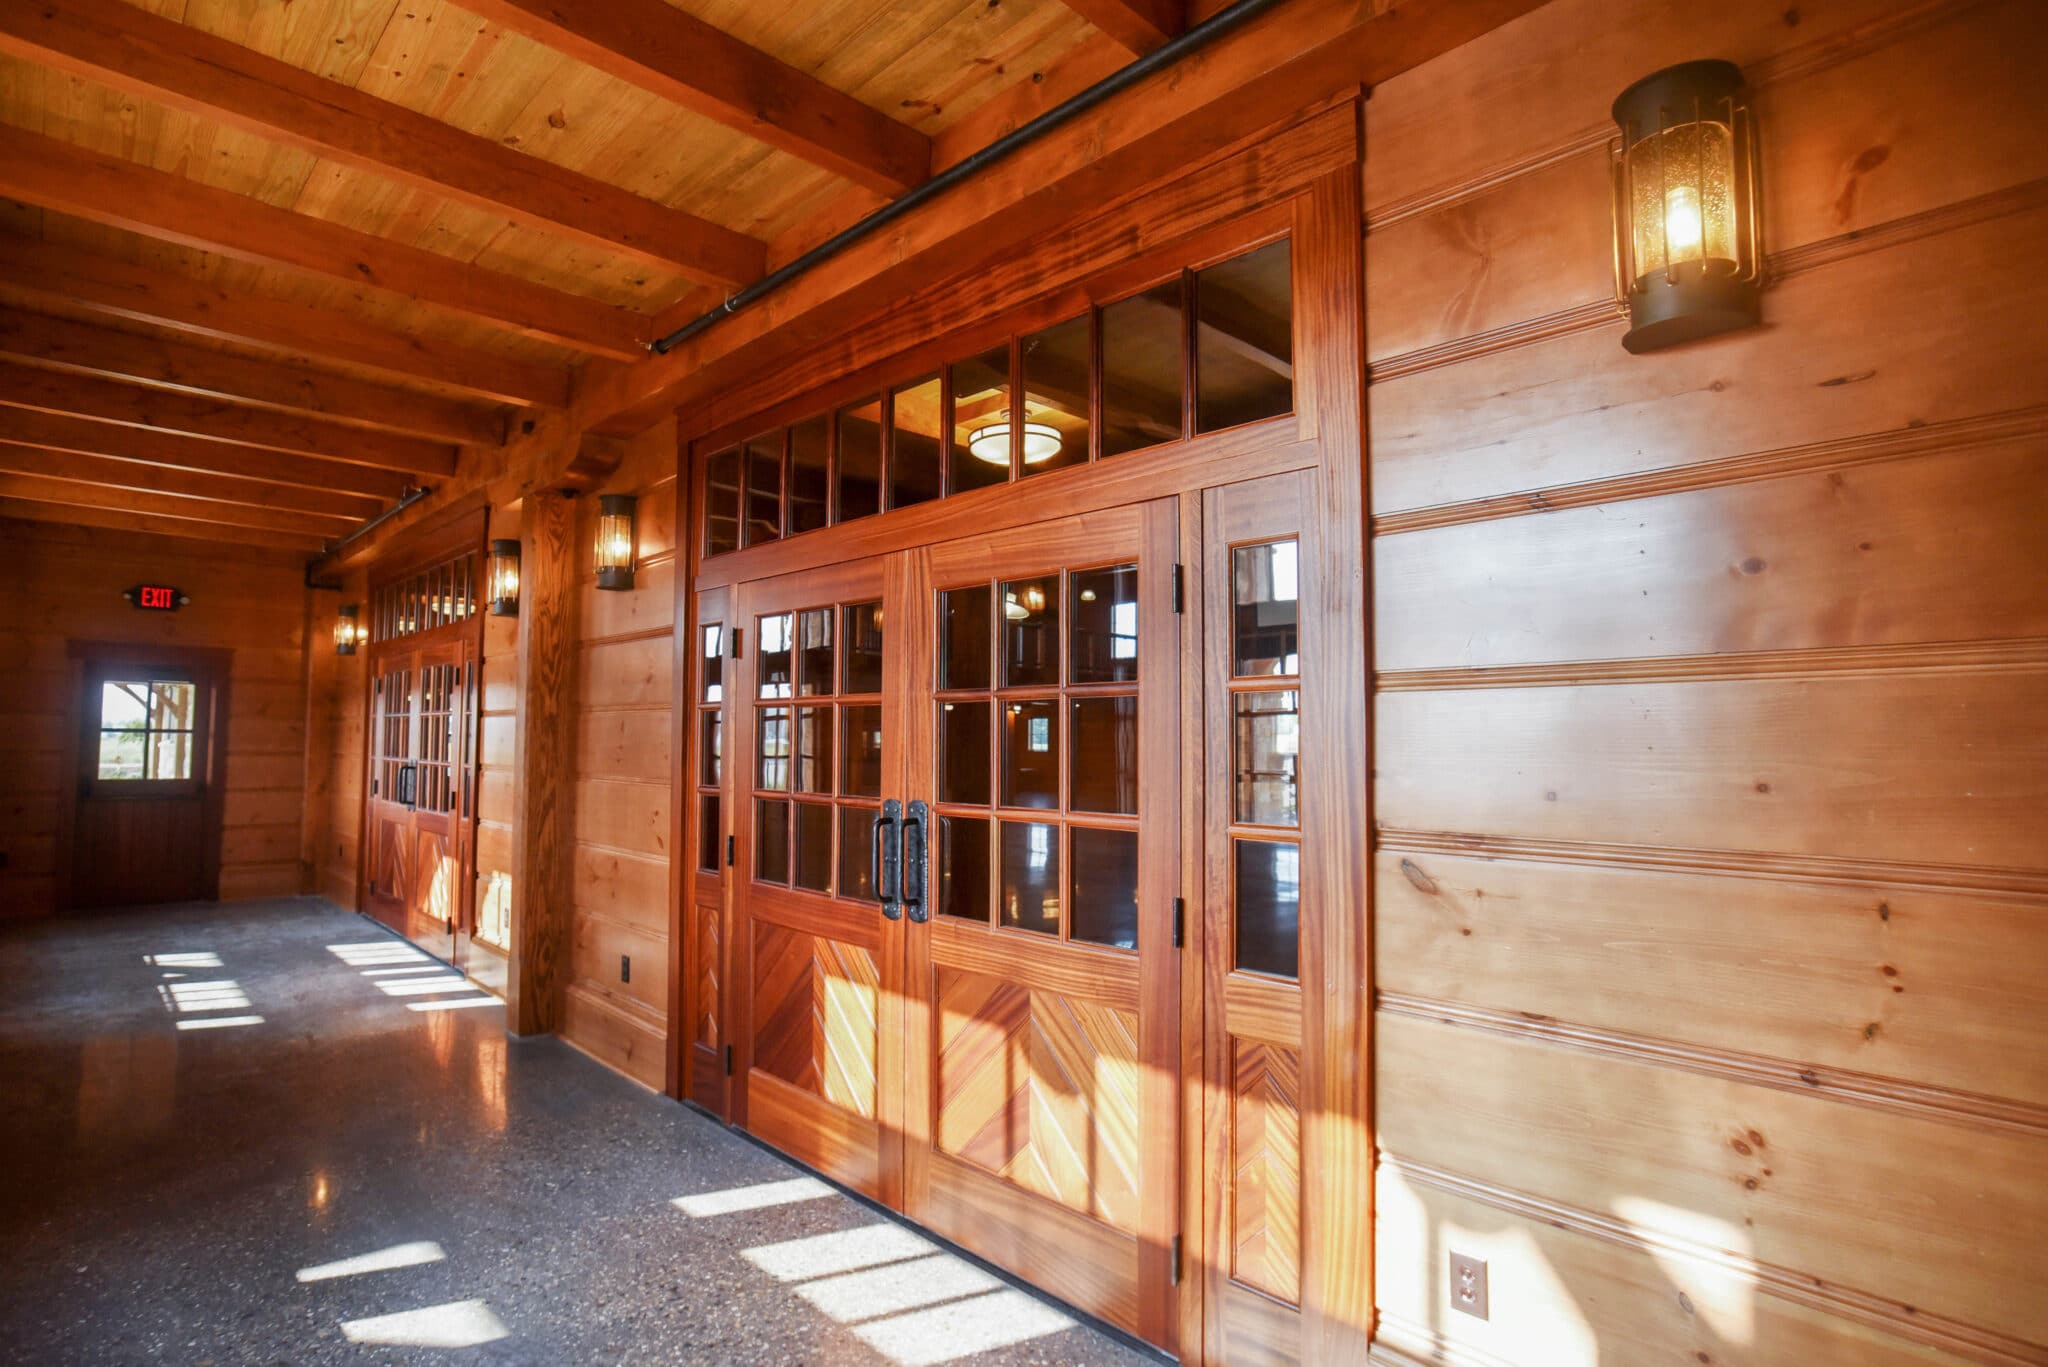 beautiful amish-crafted wooden doors and walls for event center